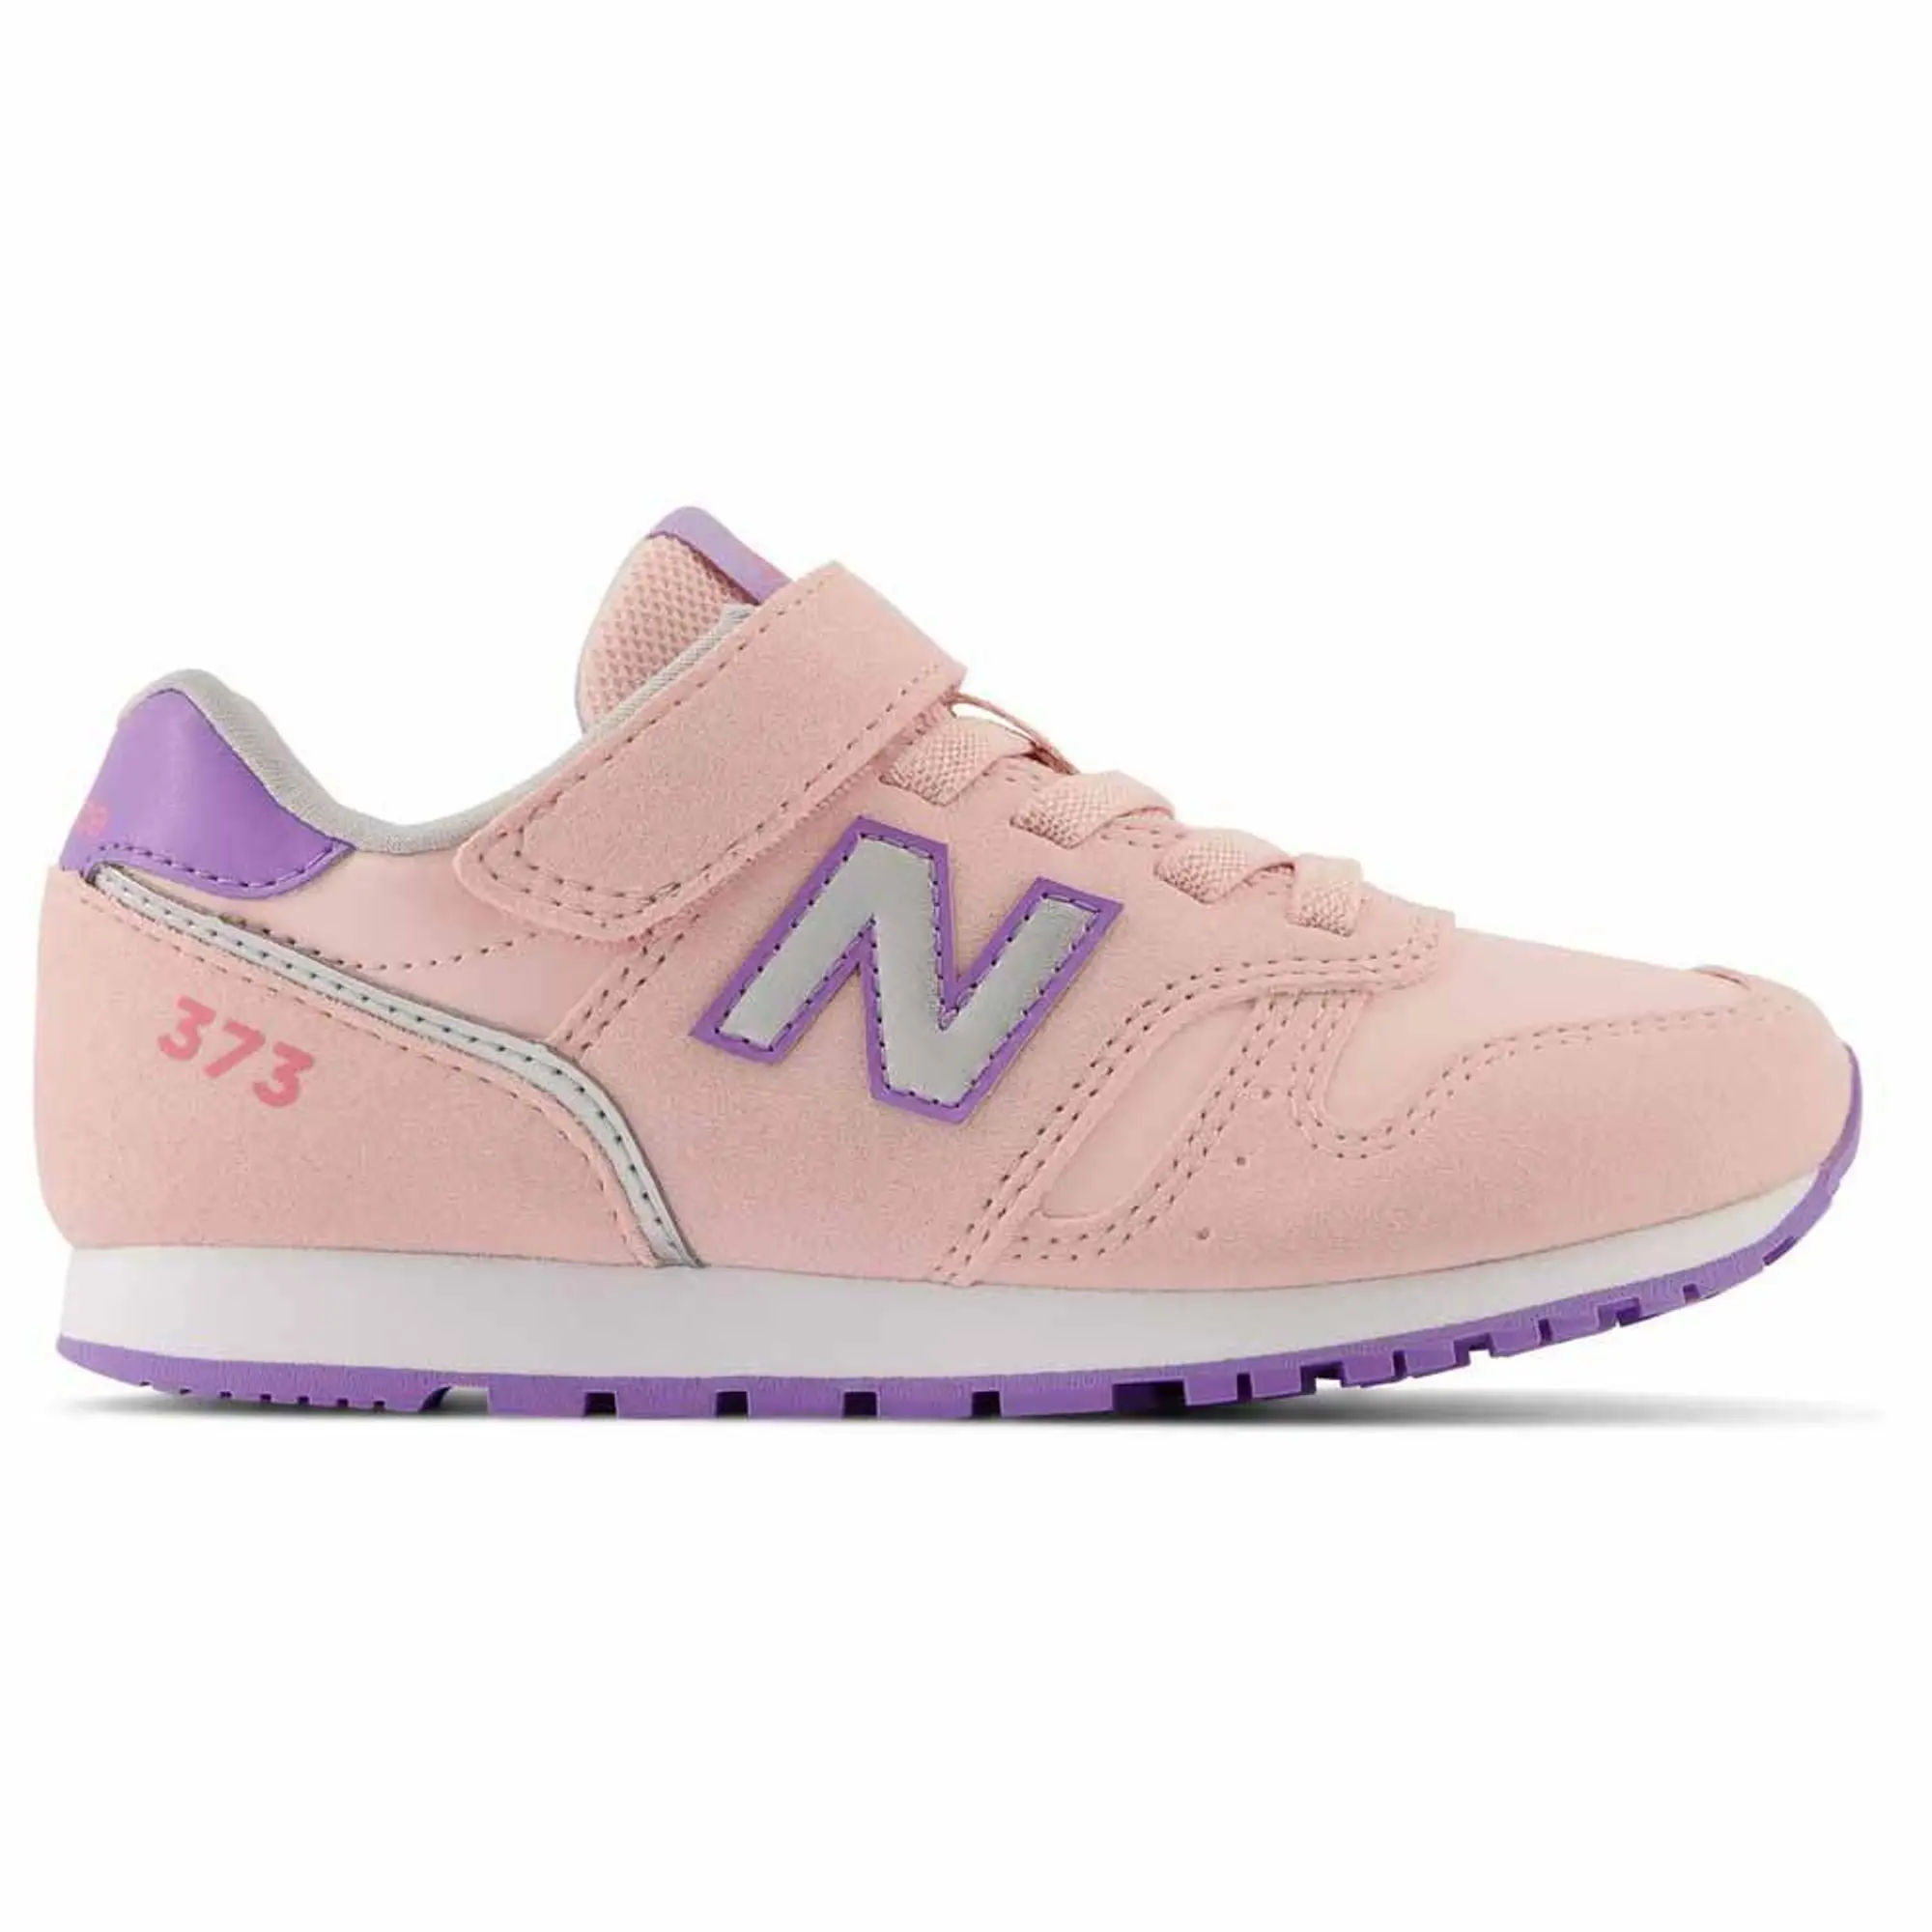 New Balance 373 Trainers  - Pink